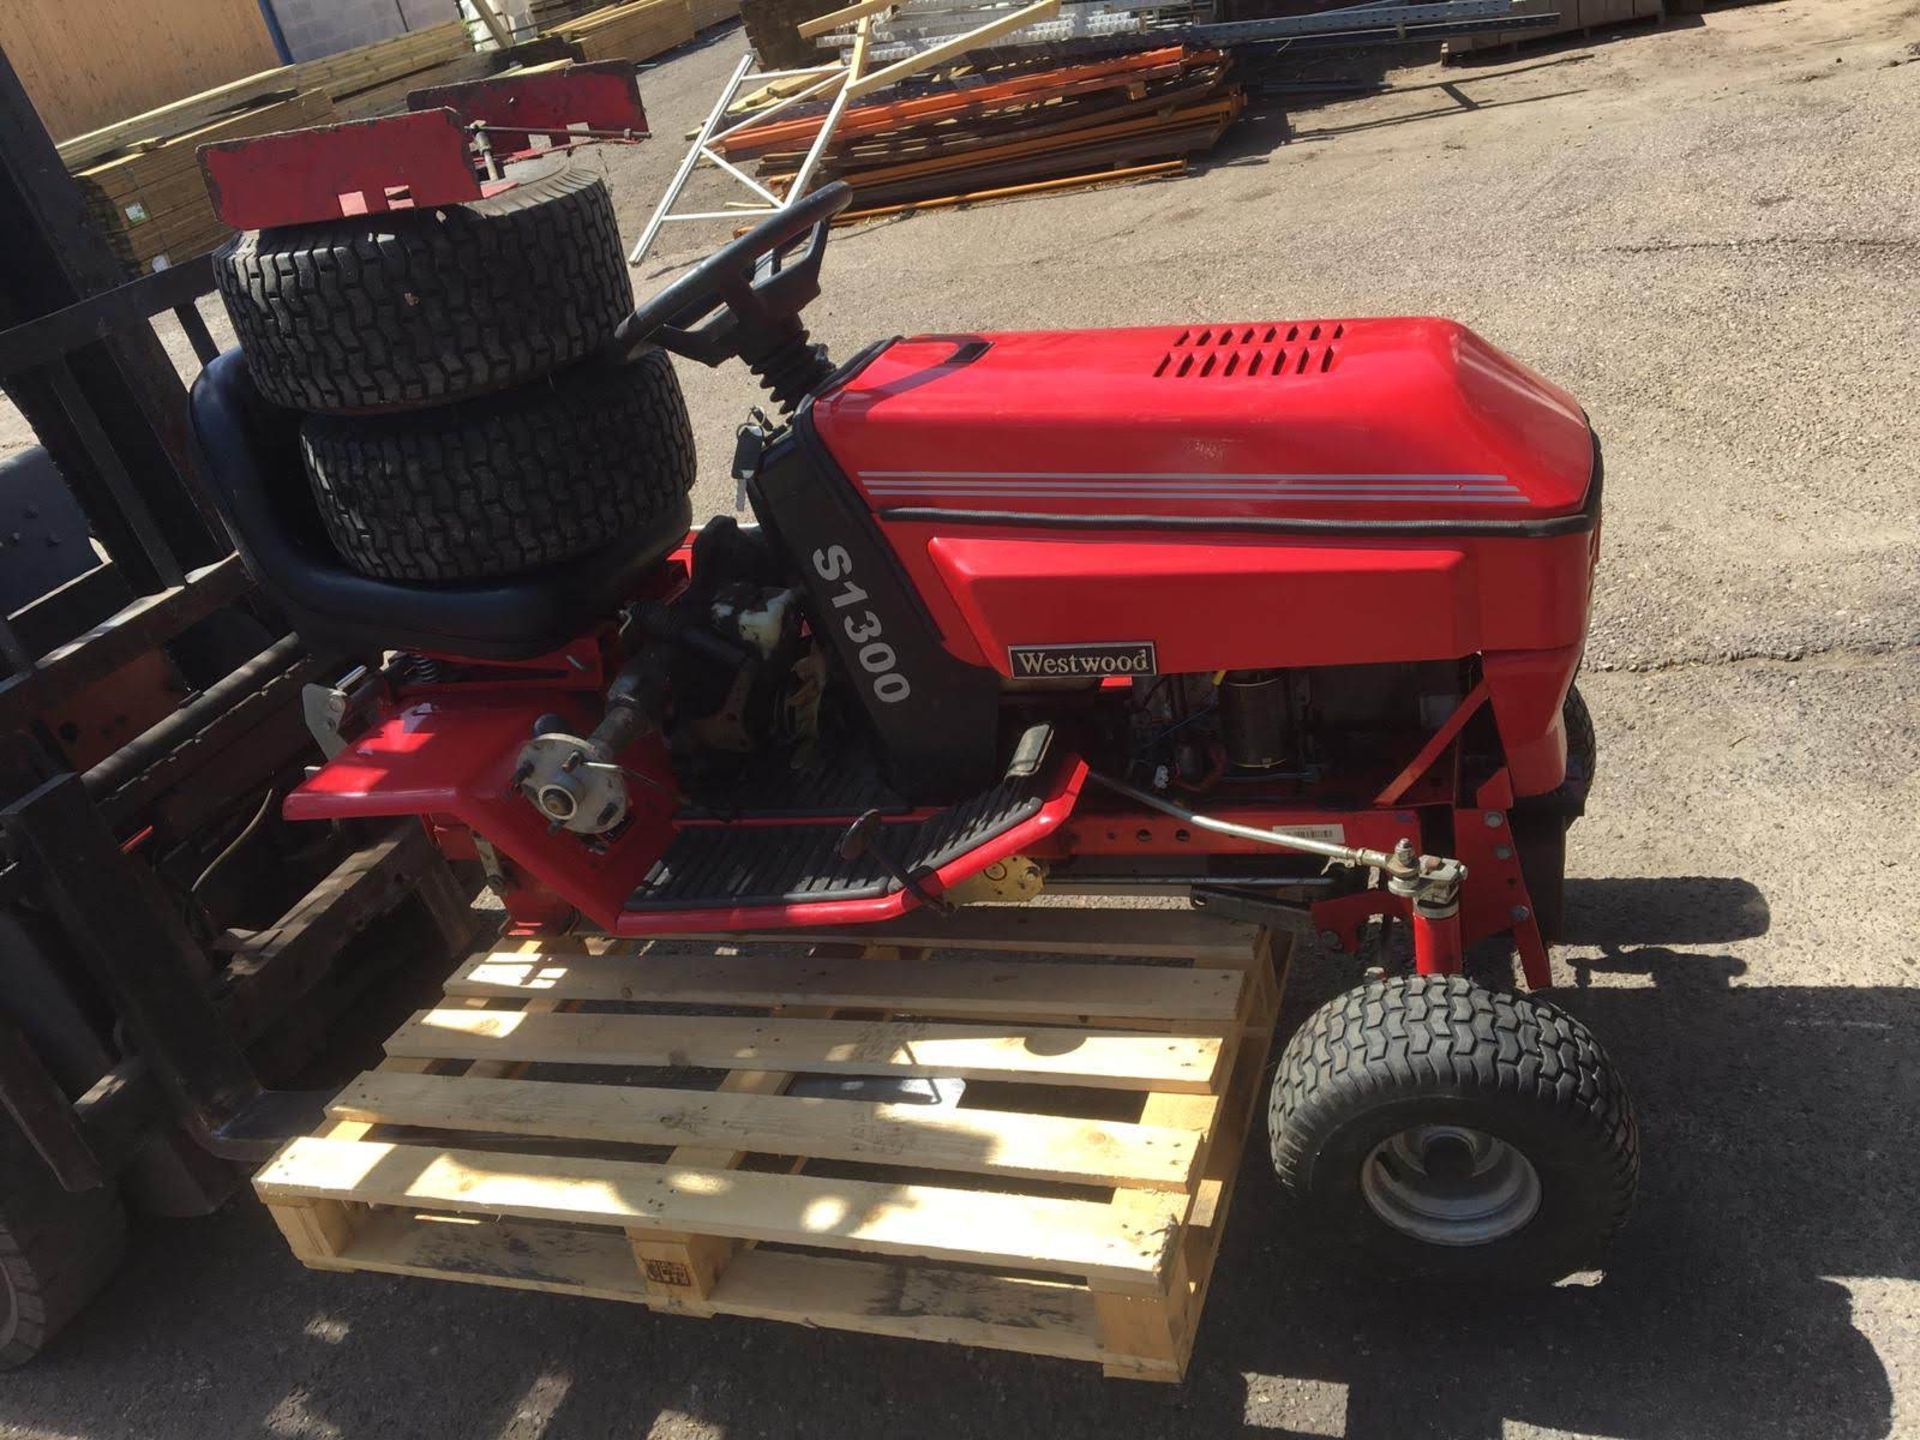 WESTWOOD S1300 RIDE ON LAWN MOWER, C/W DECK, WHEELS & GRASS COLLECTOR, SELLING AS SPARES / REPAIRS